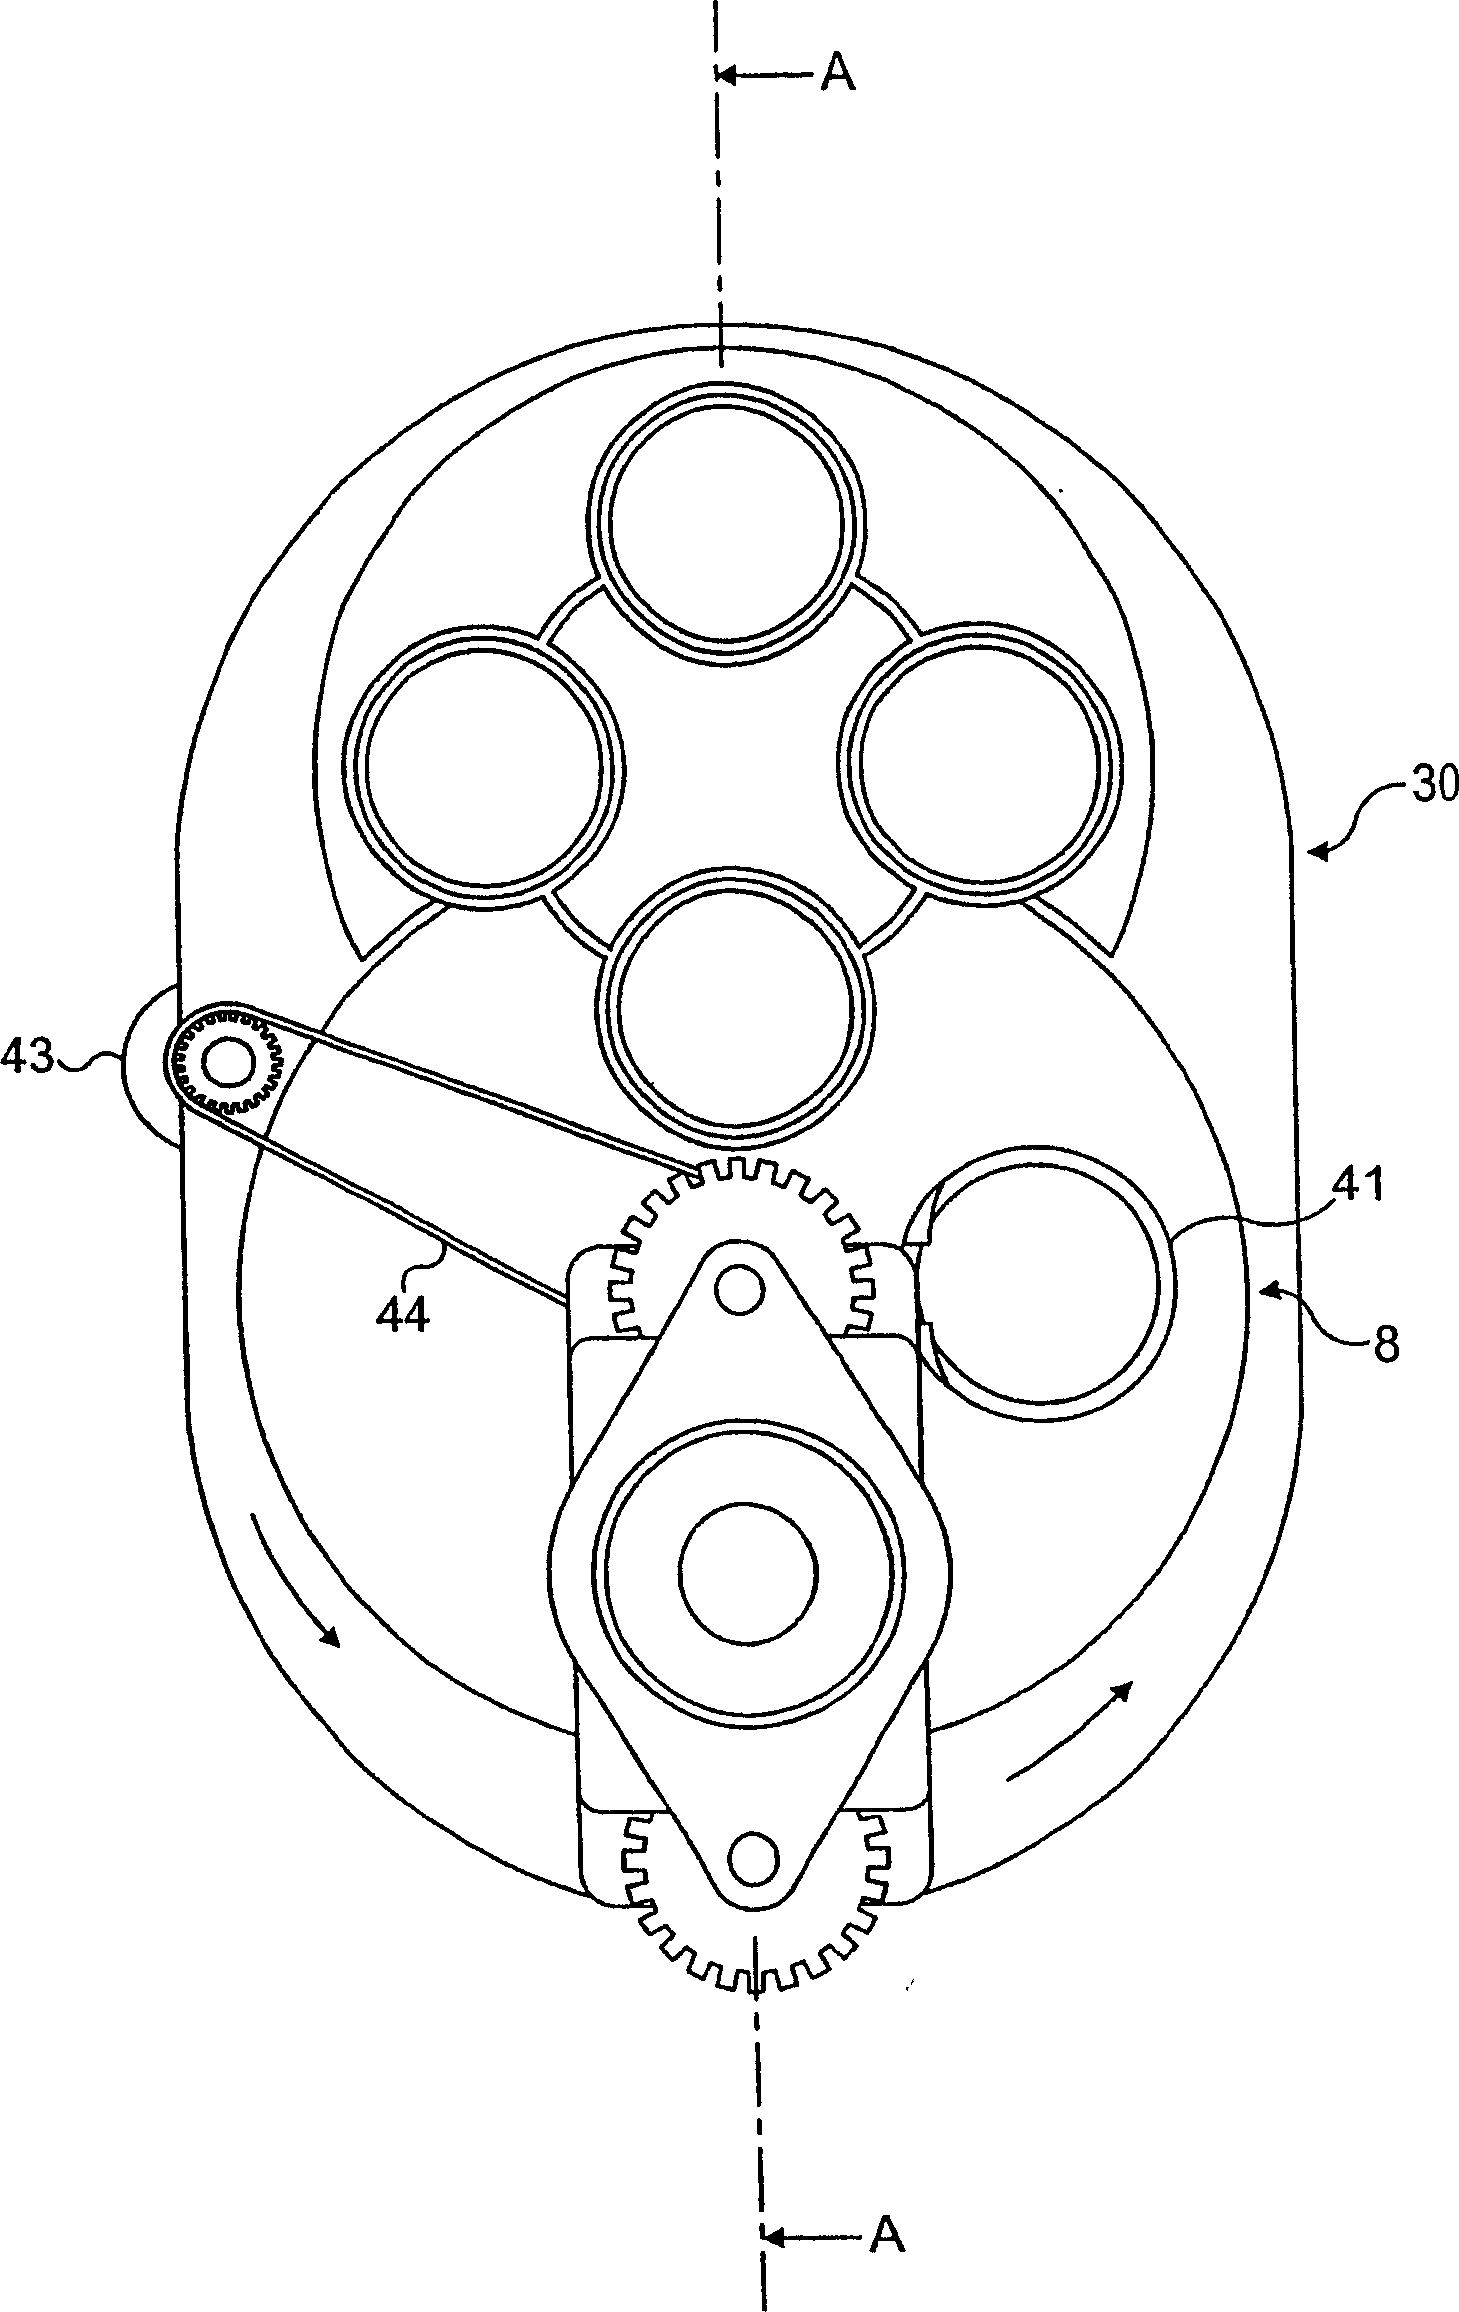 Device and method for selecting and brewing the contents of a capsule to prepare a beverage